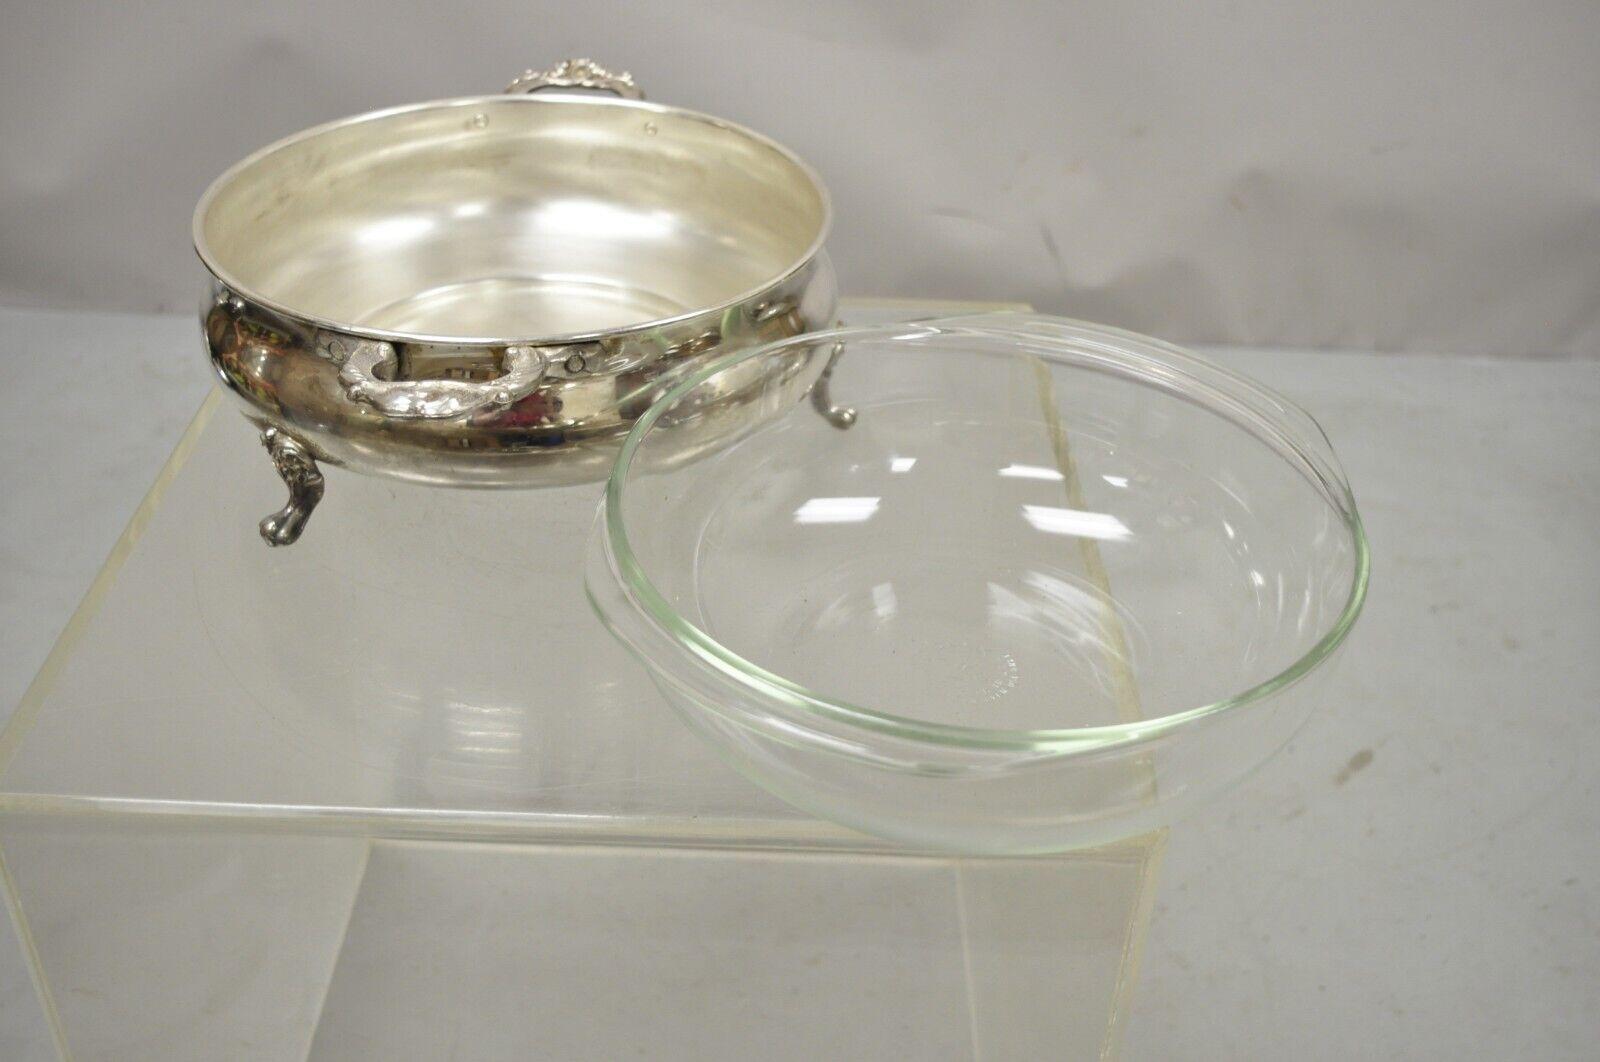 Silver Mfg Corp Silver Plate Covered Platter Serving Tray Dish Bowl on Feet For Sale 1